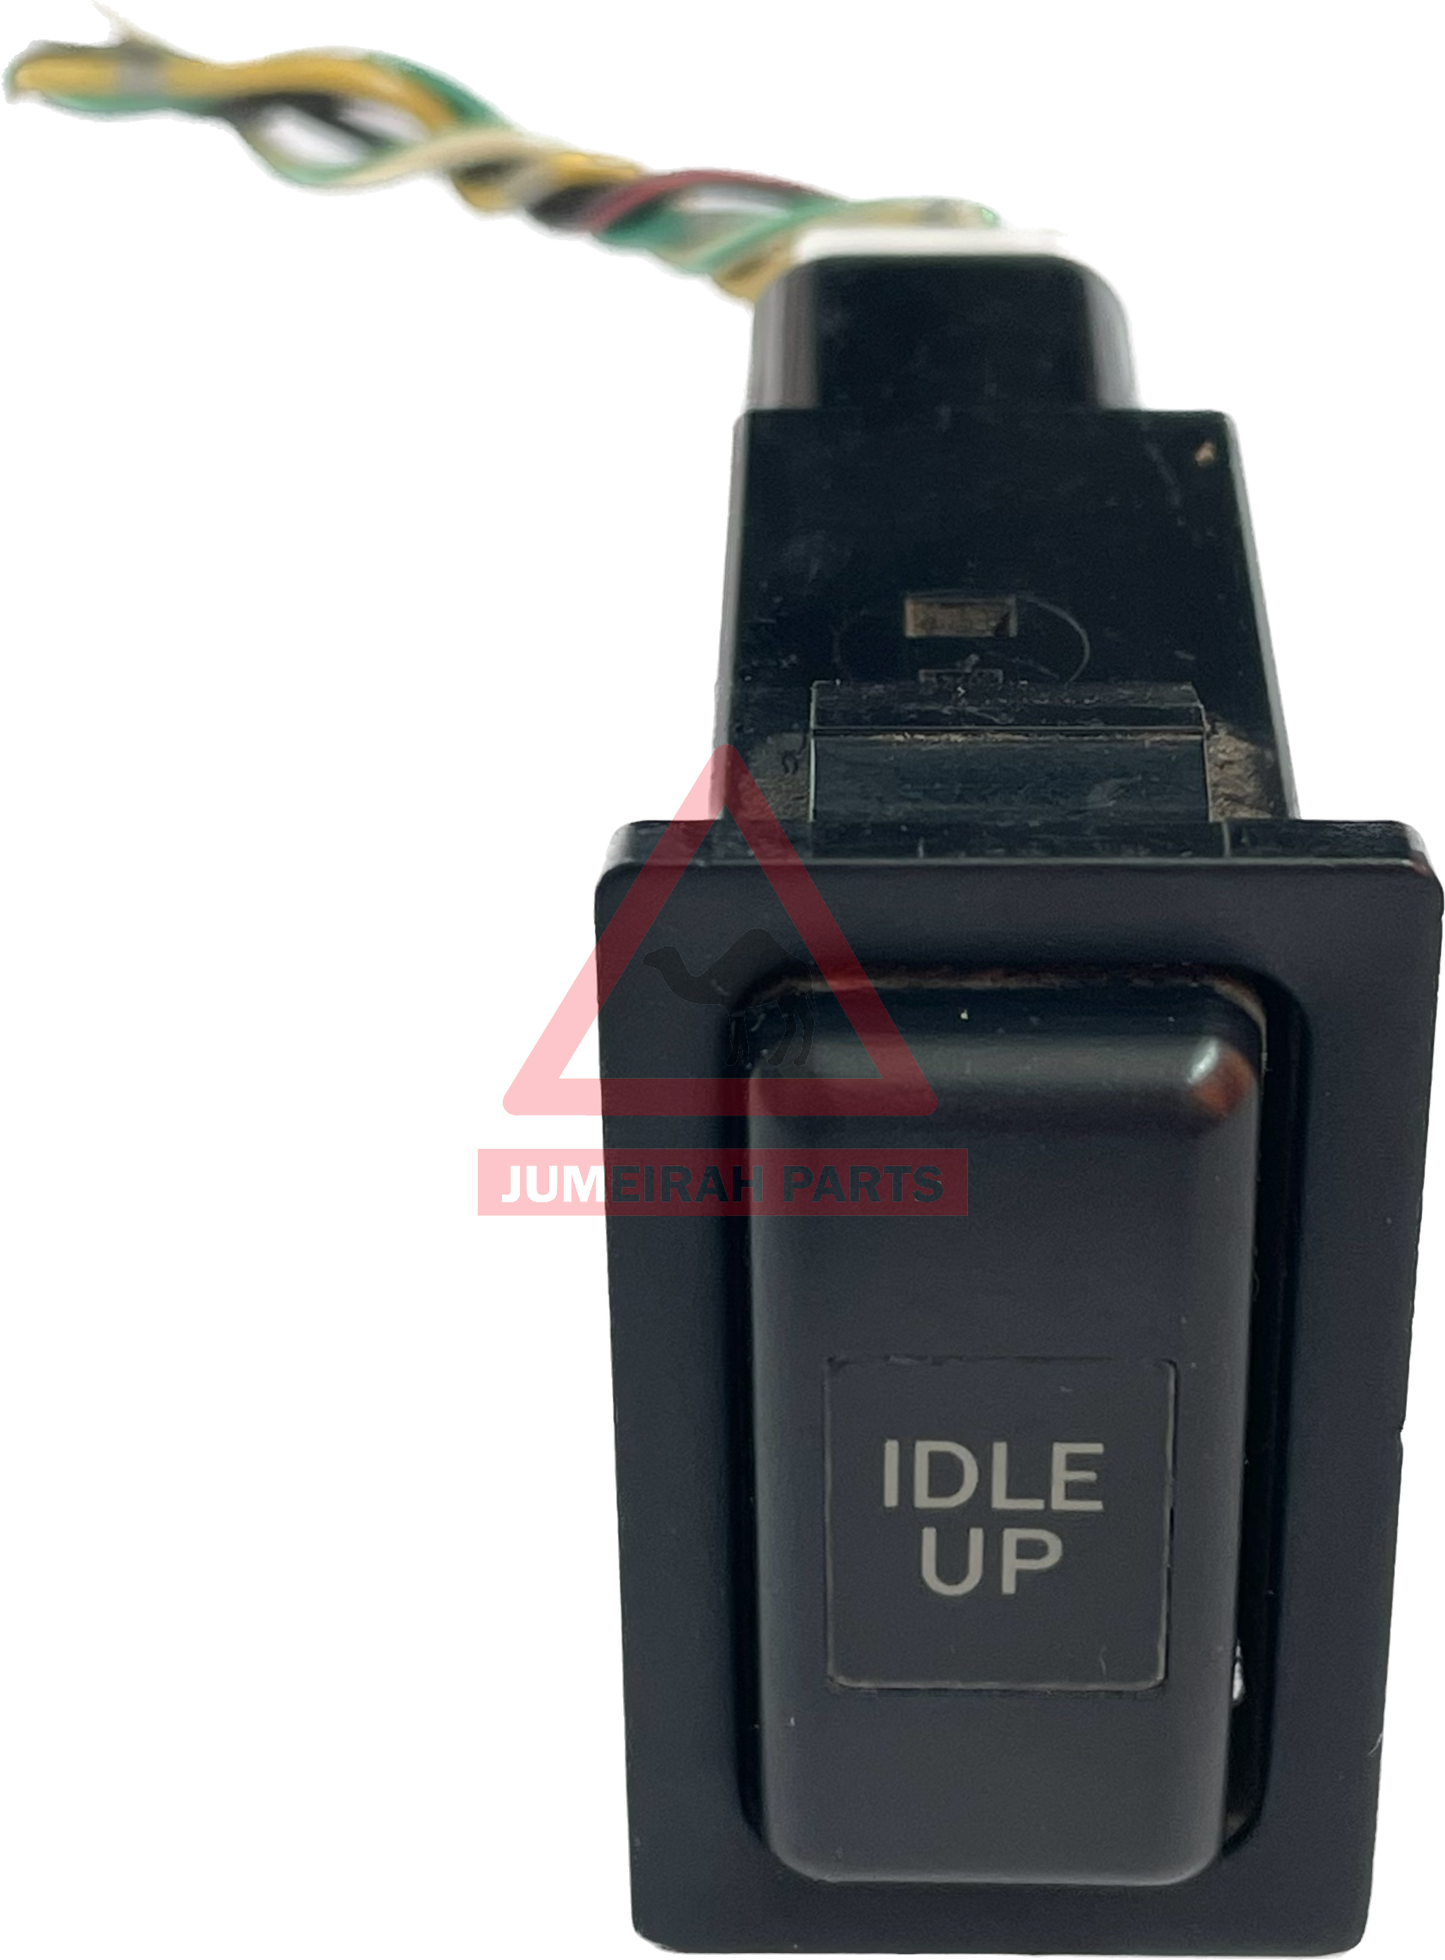 80 Series Idle Up Switch